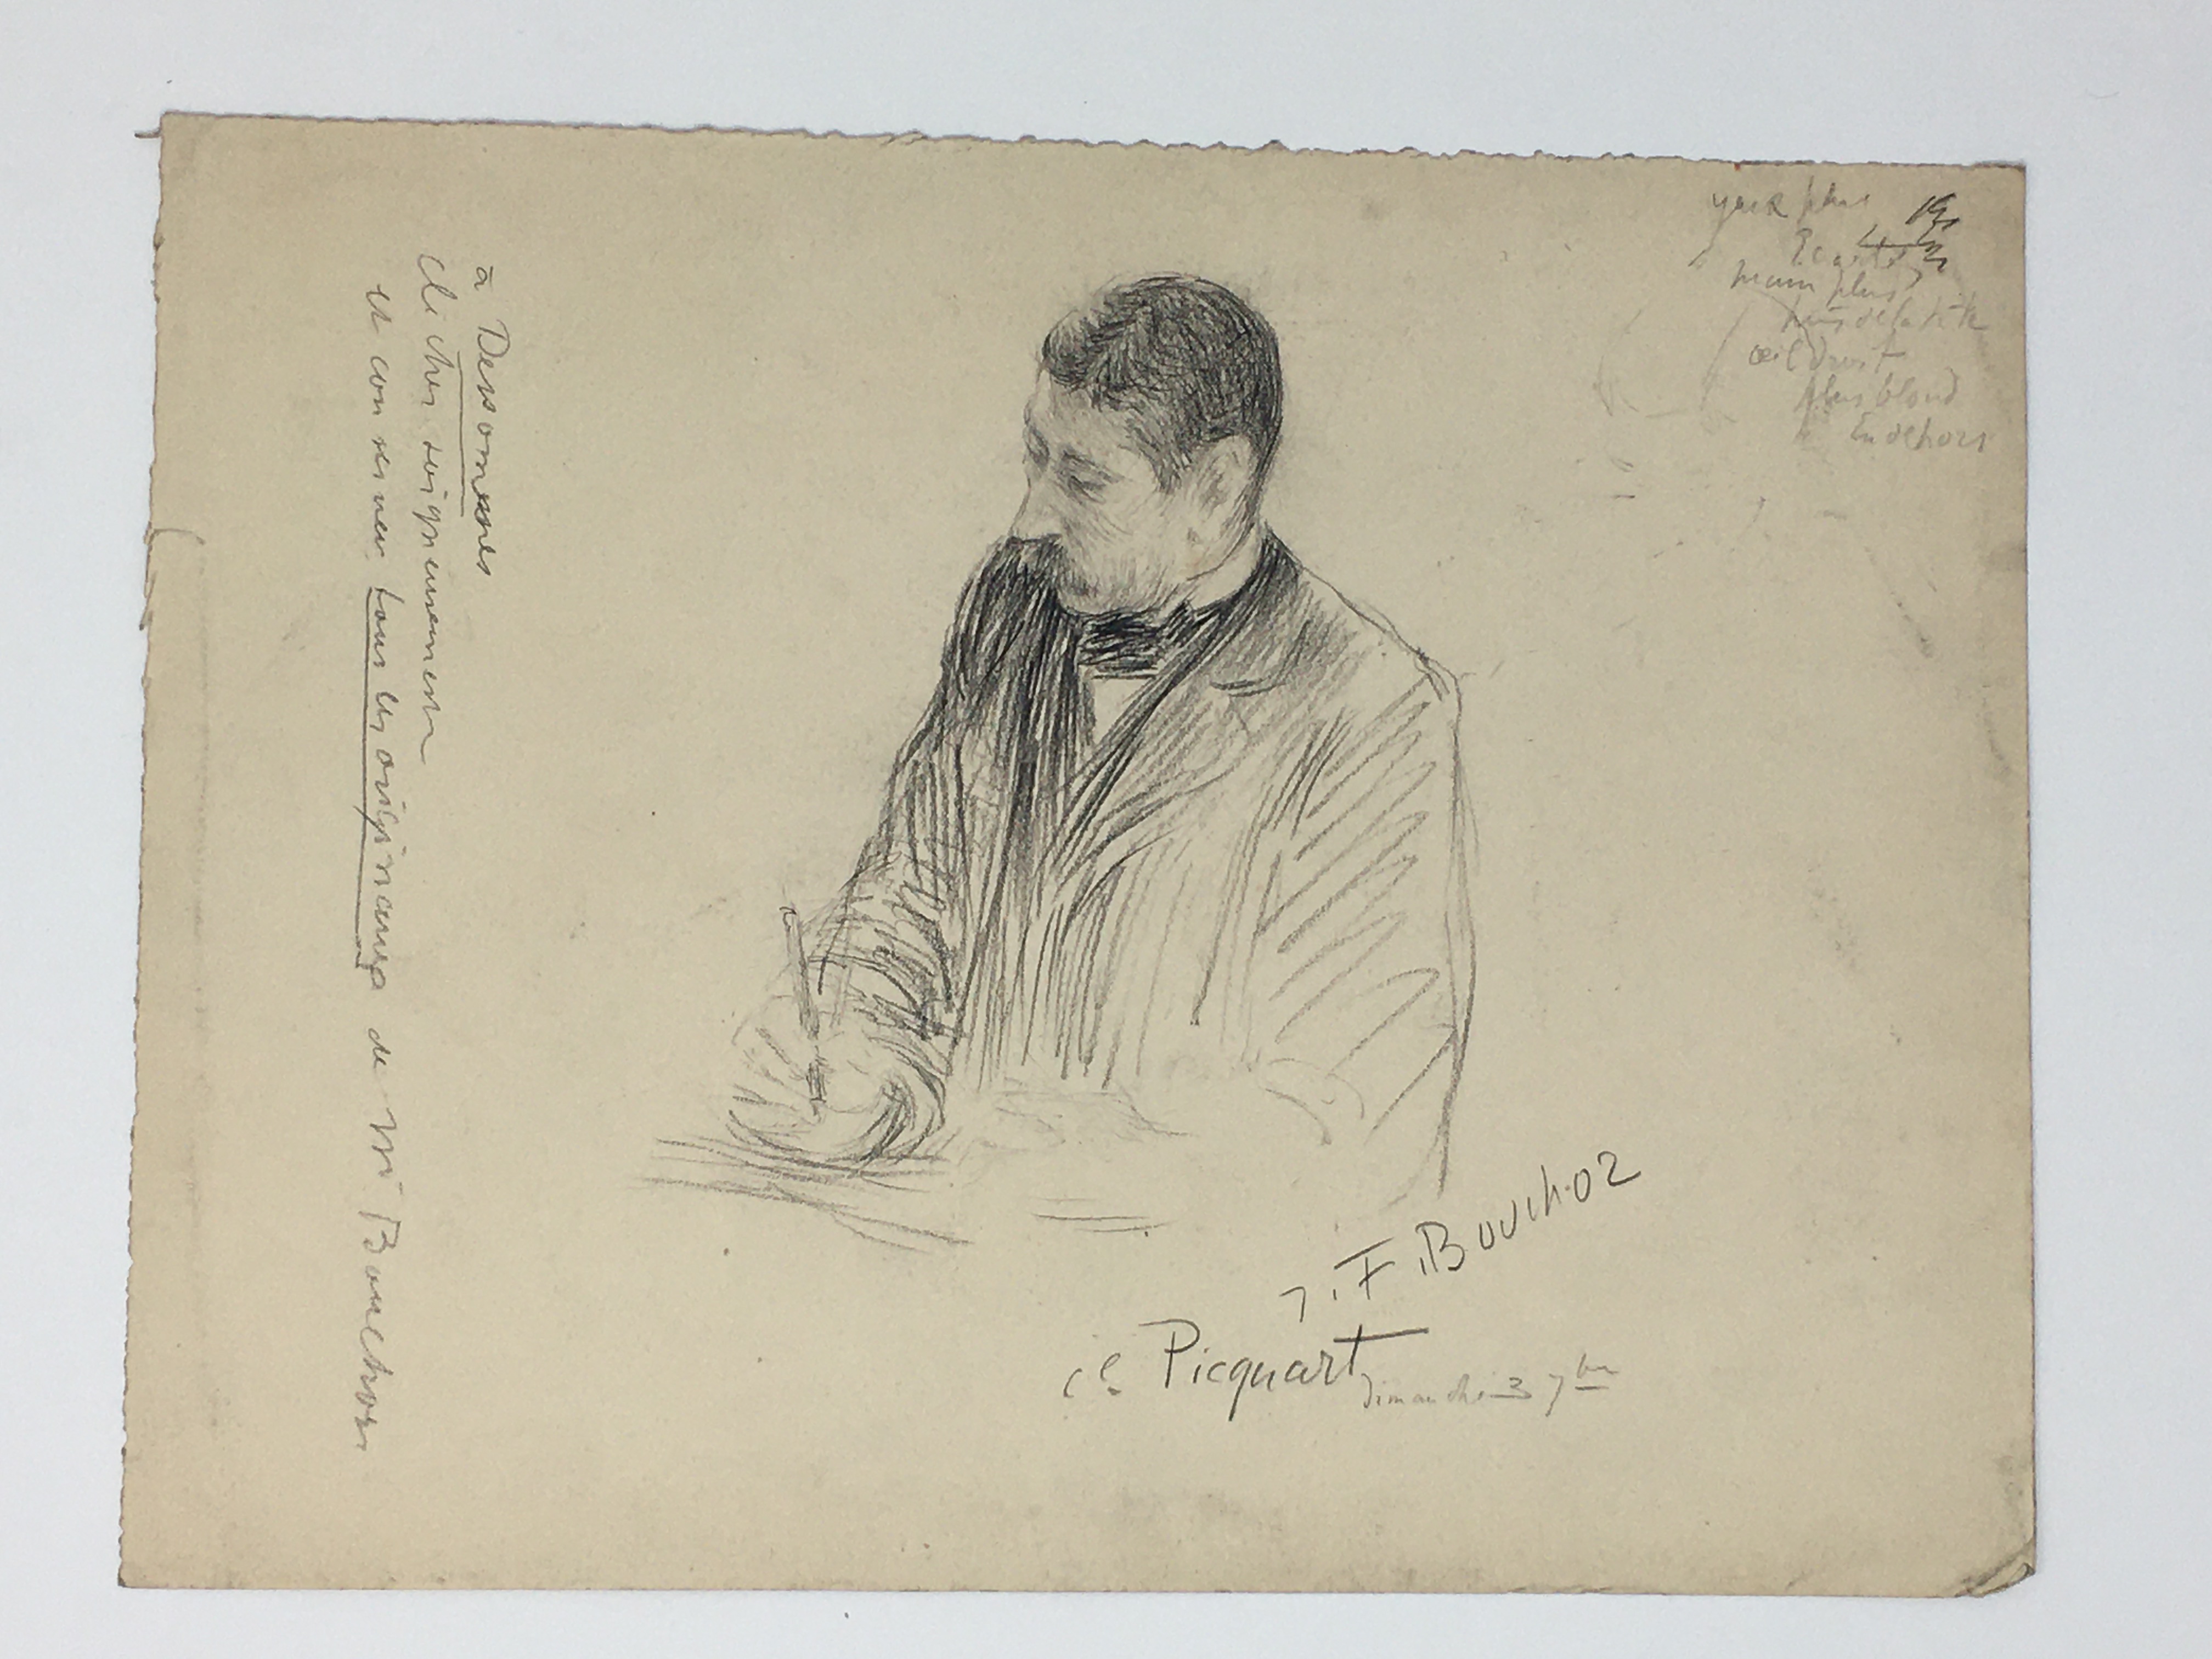 J'Accuse Newspaper, Emile Zola Quote, Signed Dreyfus Portrait, Rare Trial Drawings & Schwartzkoppen - Image 36 of 74